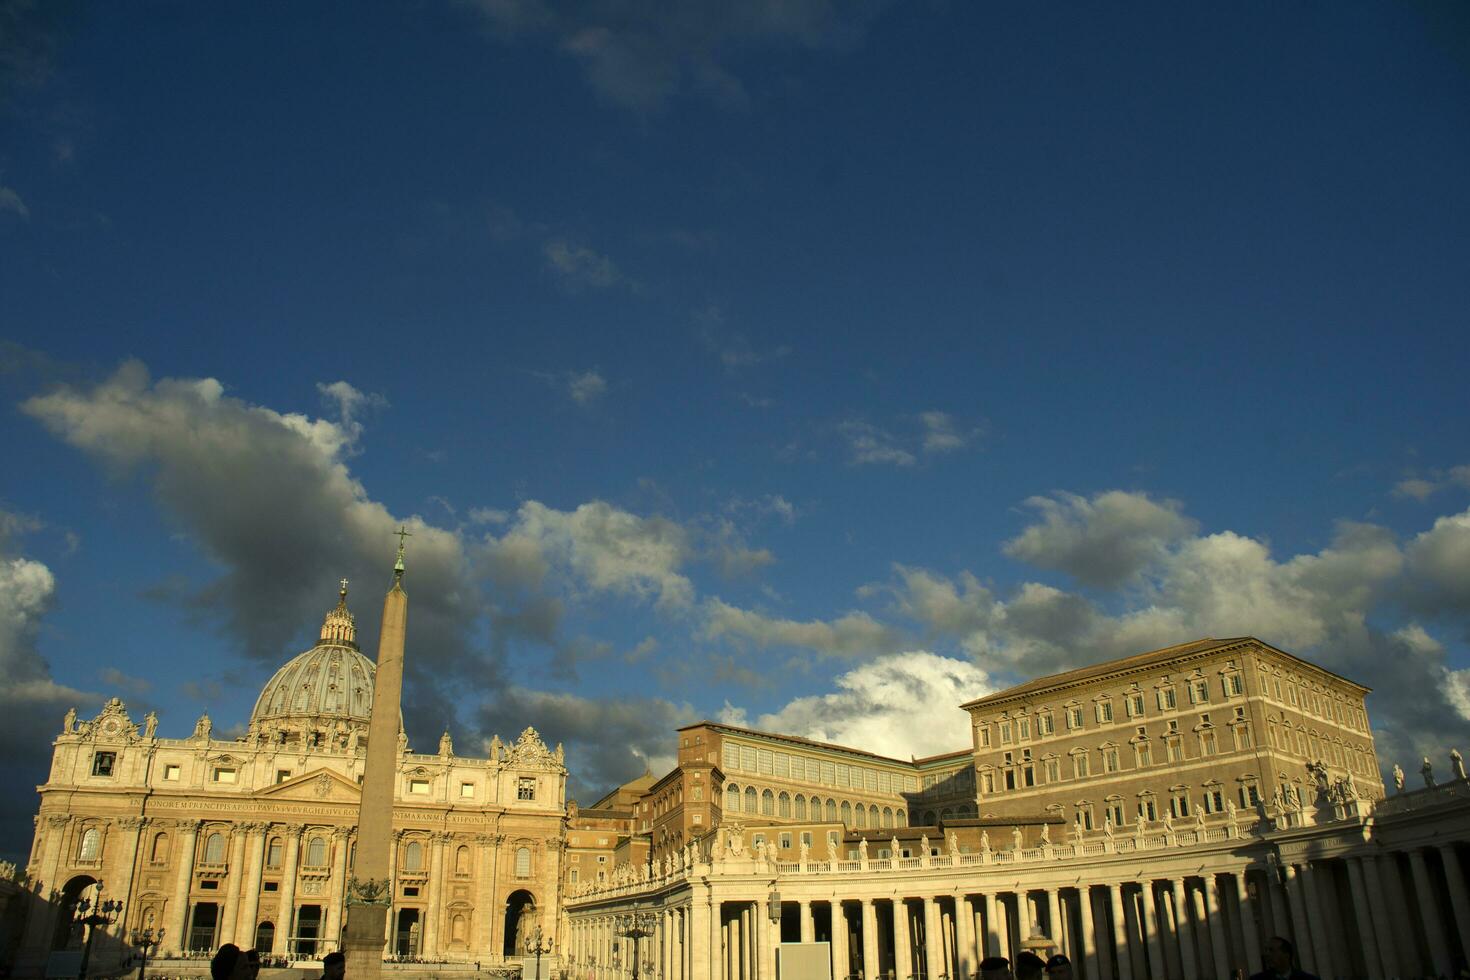 The Basilica of St. Peter at dawn photo